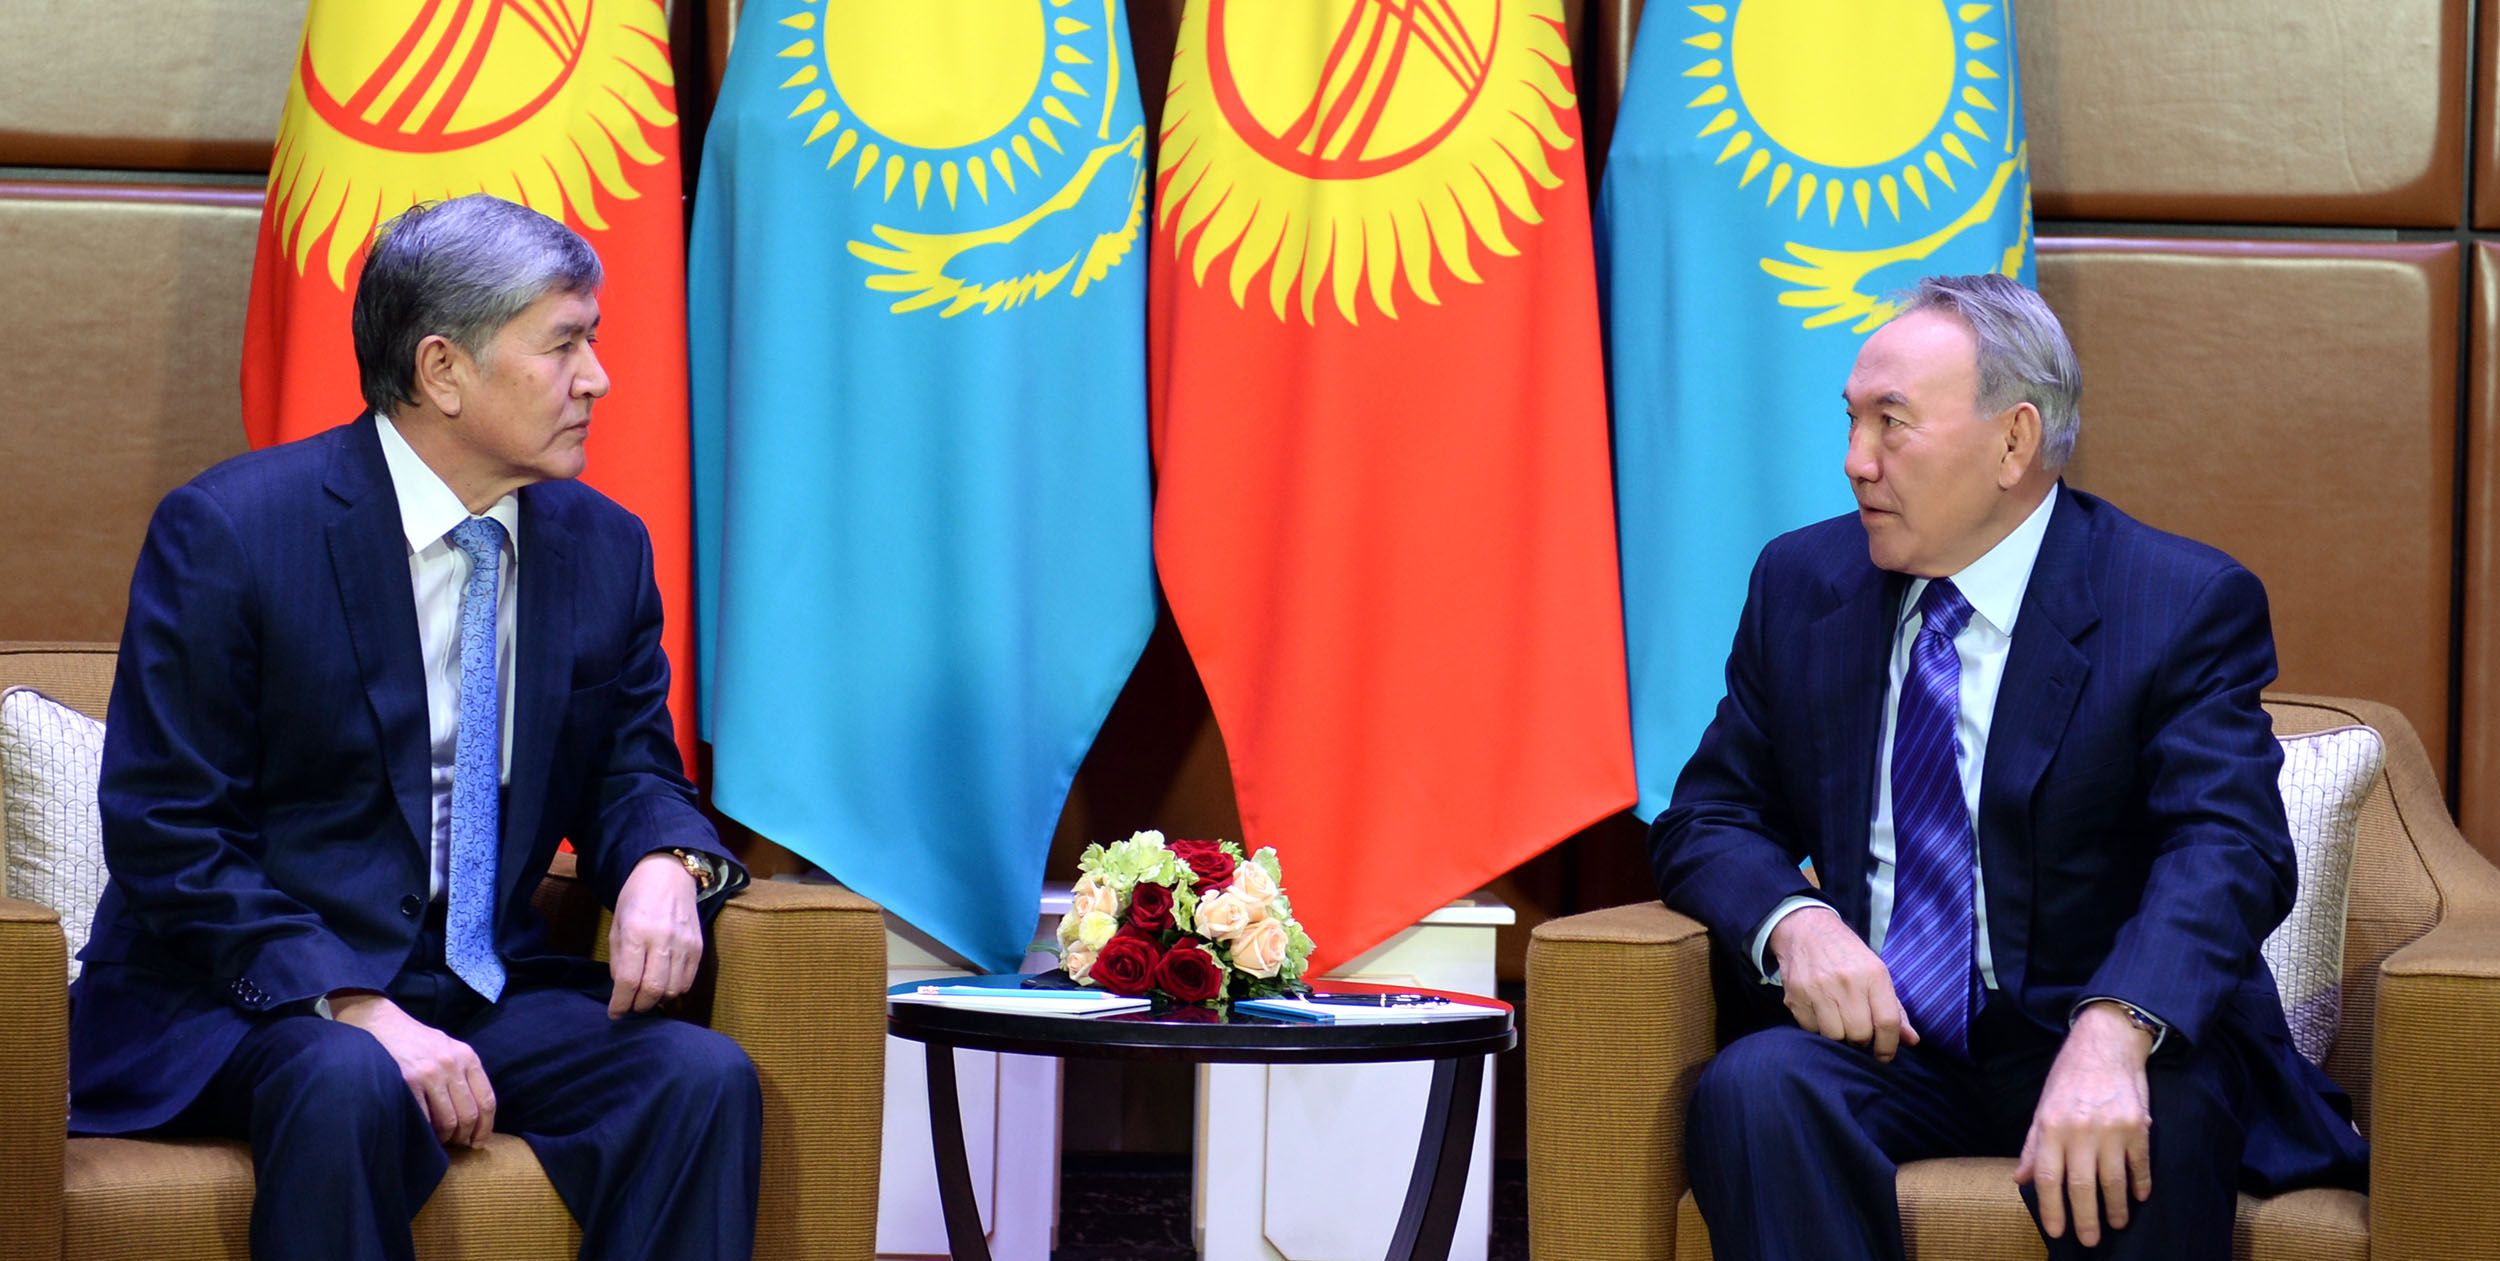 President Nursultan Nazarbayev during his working visit to Almaty held a meeting with President of Kyrgyzstan Almazbek Atambayev on March 26, 2014.